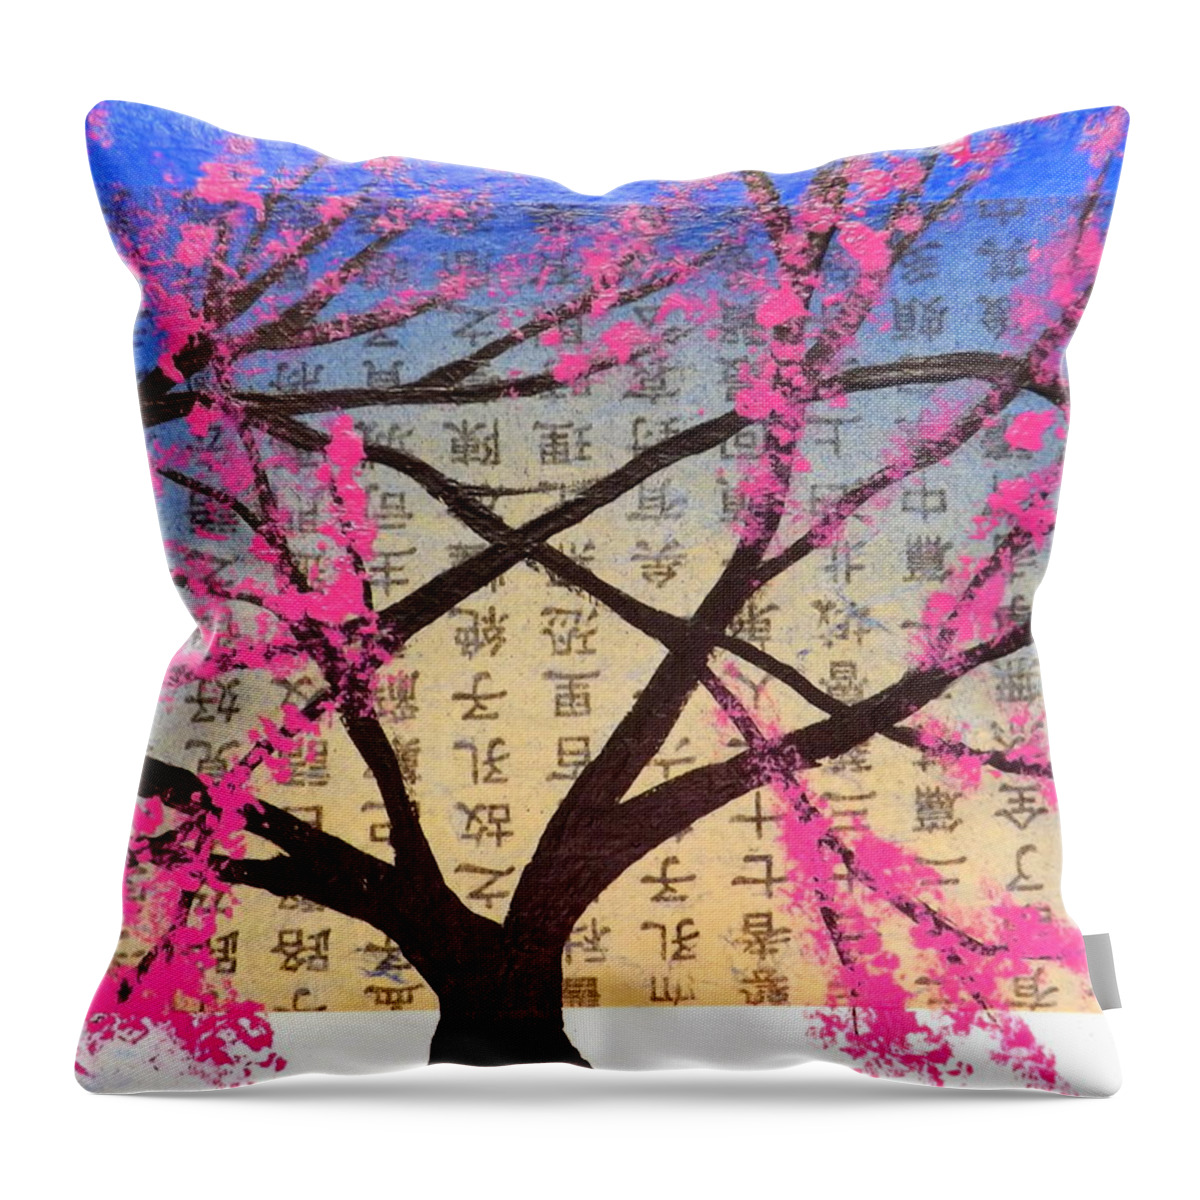 Greeting Card. Asian Bloom Throw Pillow featuring the painting Asian Bloom by Darren Robinson